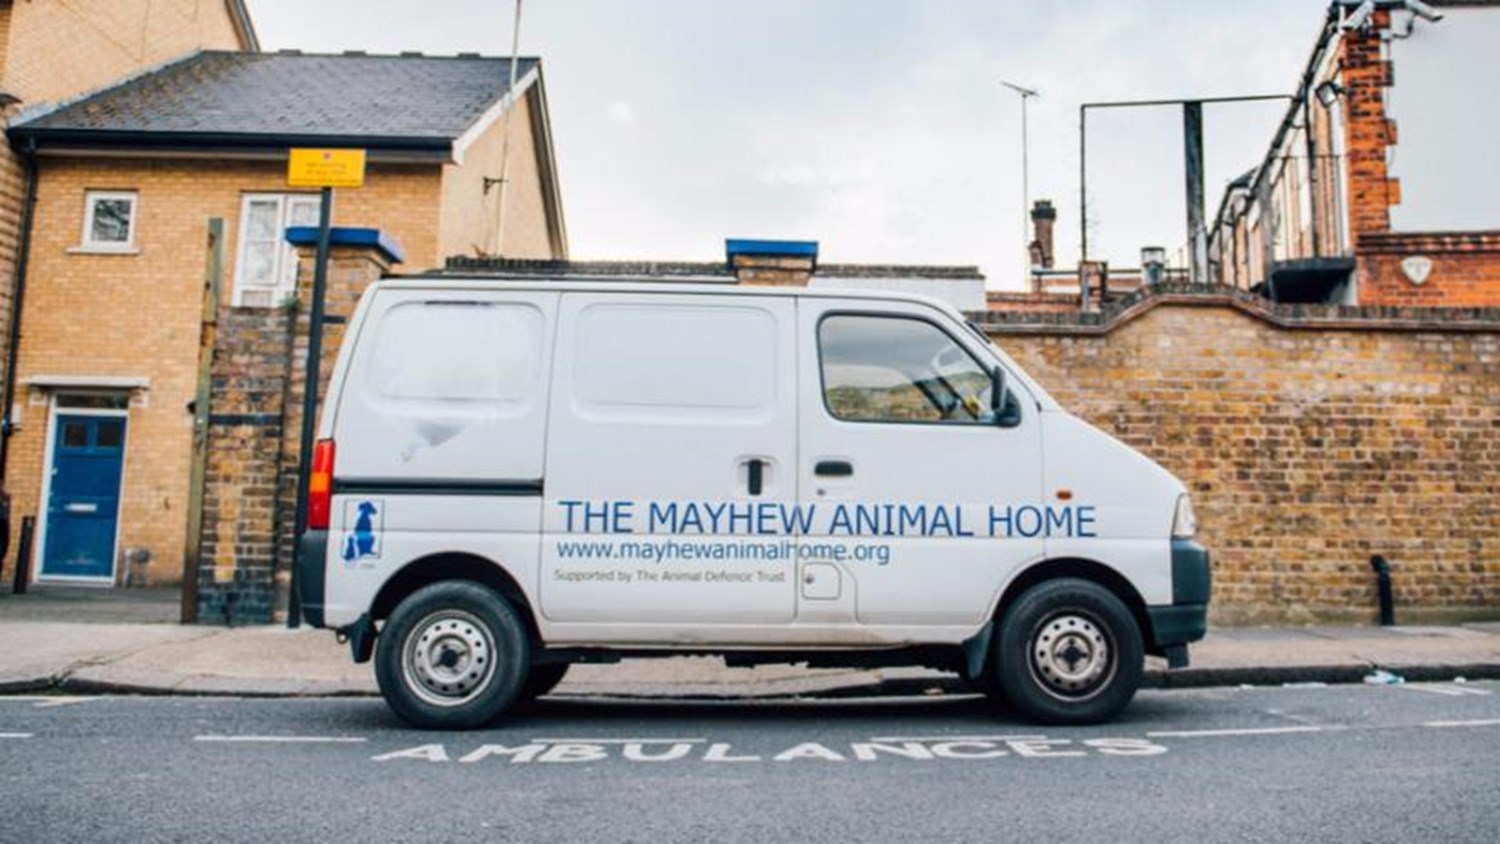 Urgent appeal to replace our stolen animal ambulance - JustGiving